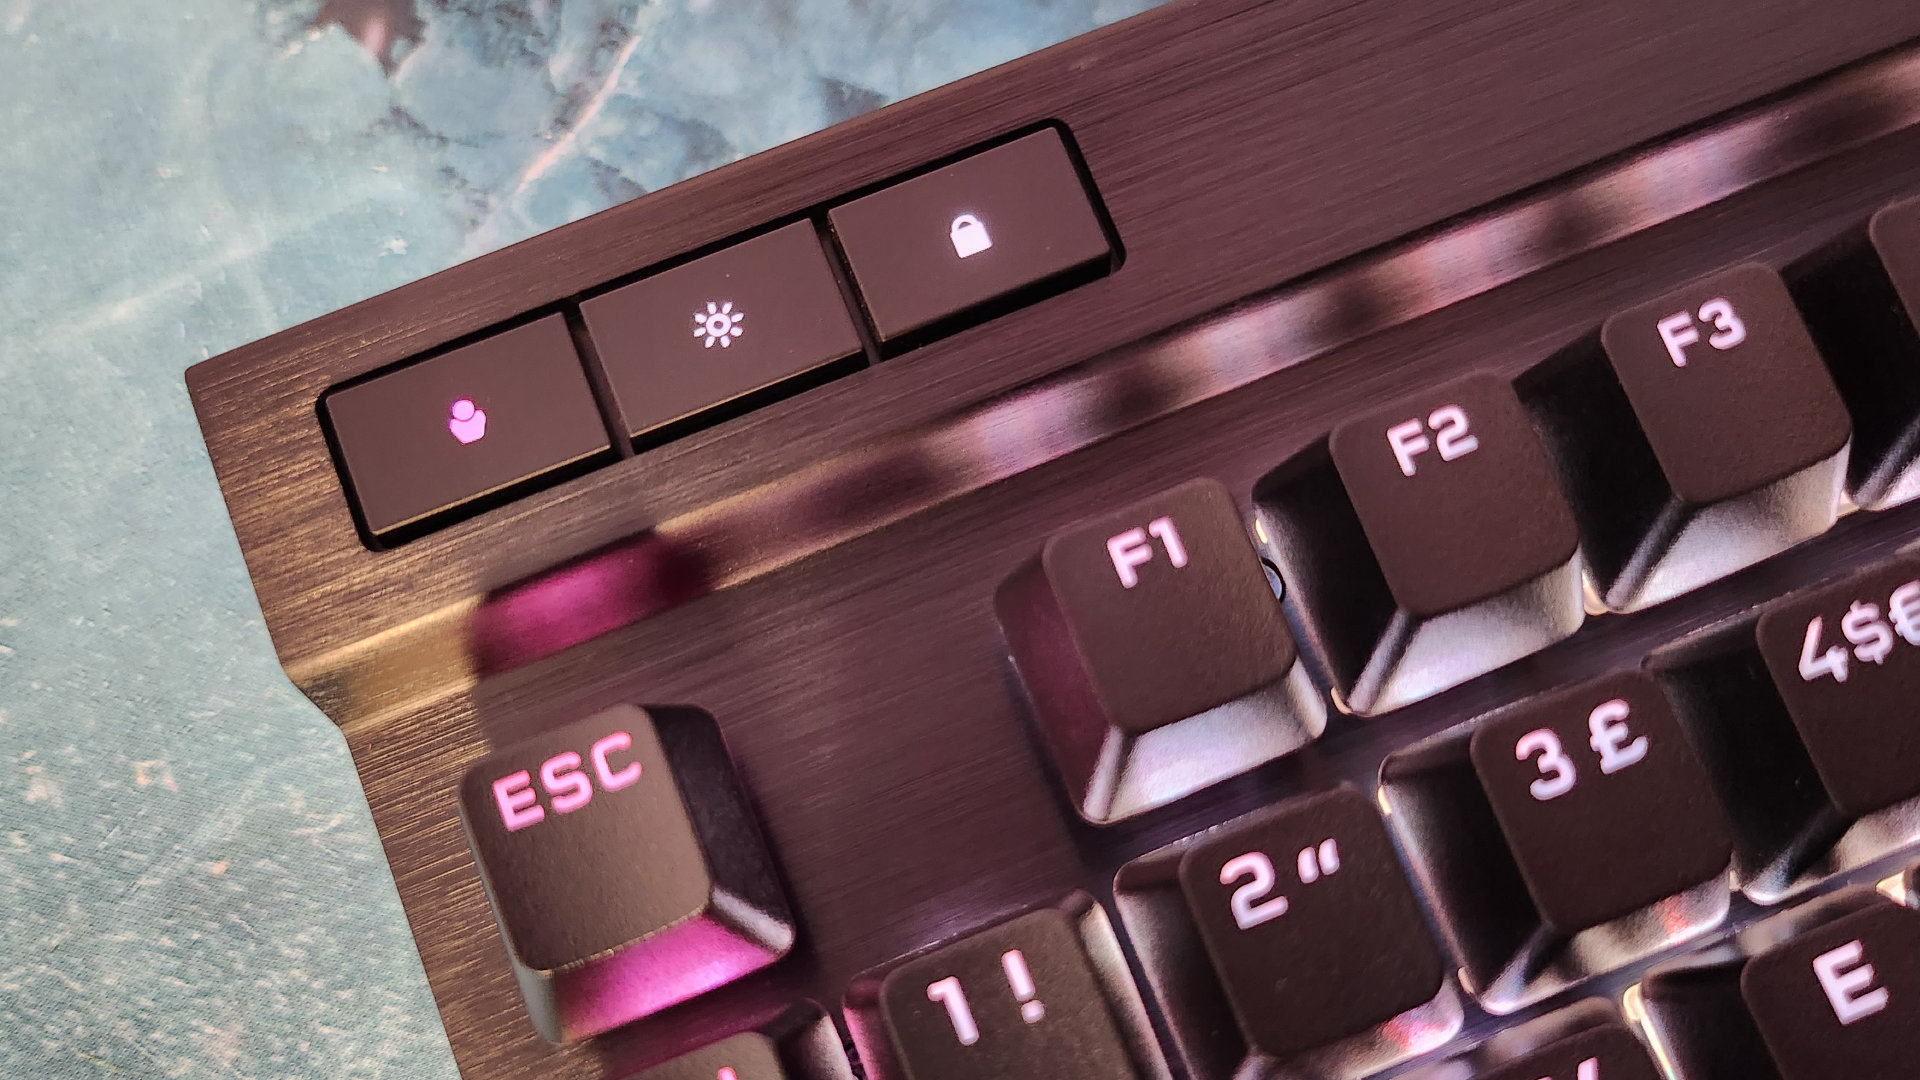 Corsair K70 RGB Pro review: A zoomed in view of a gaming keyboard, highlighting some function keys